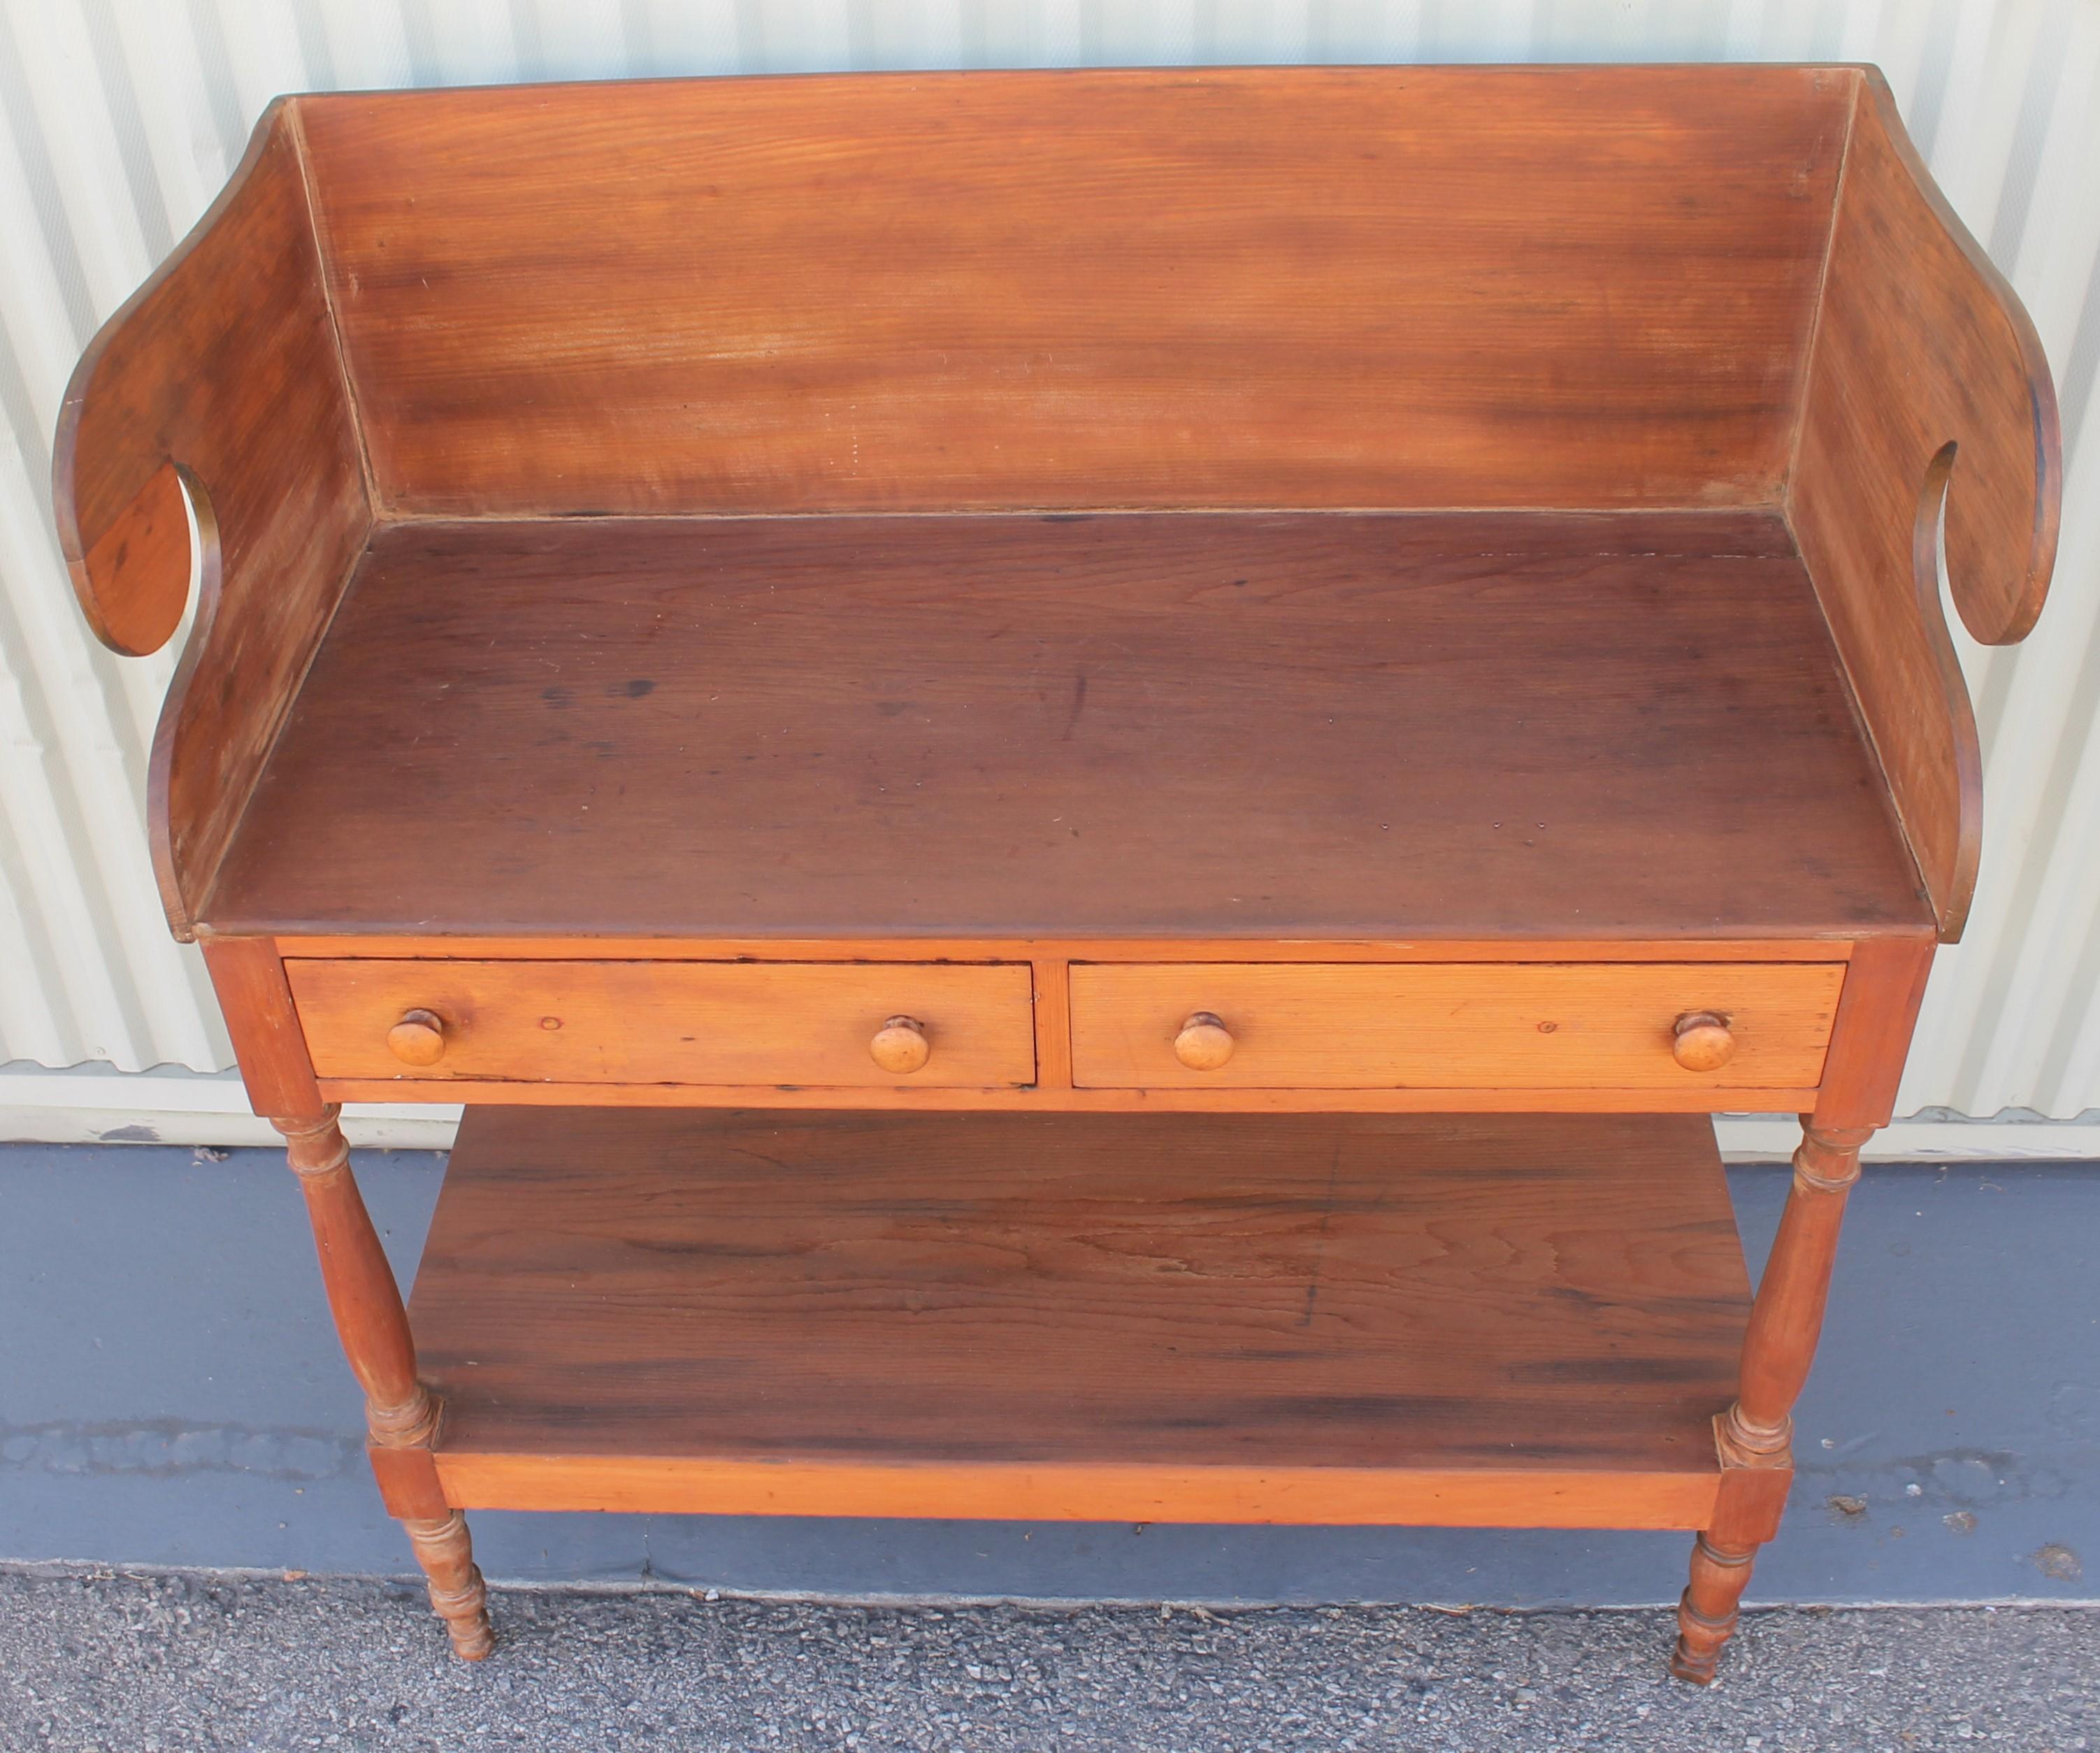 Hand-Crafted 19th Century Console Table with Drawers from Pennsylvania